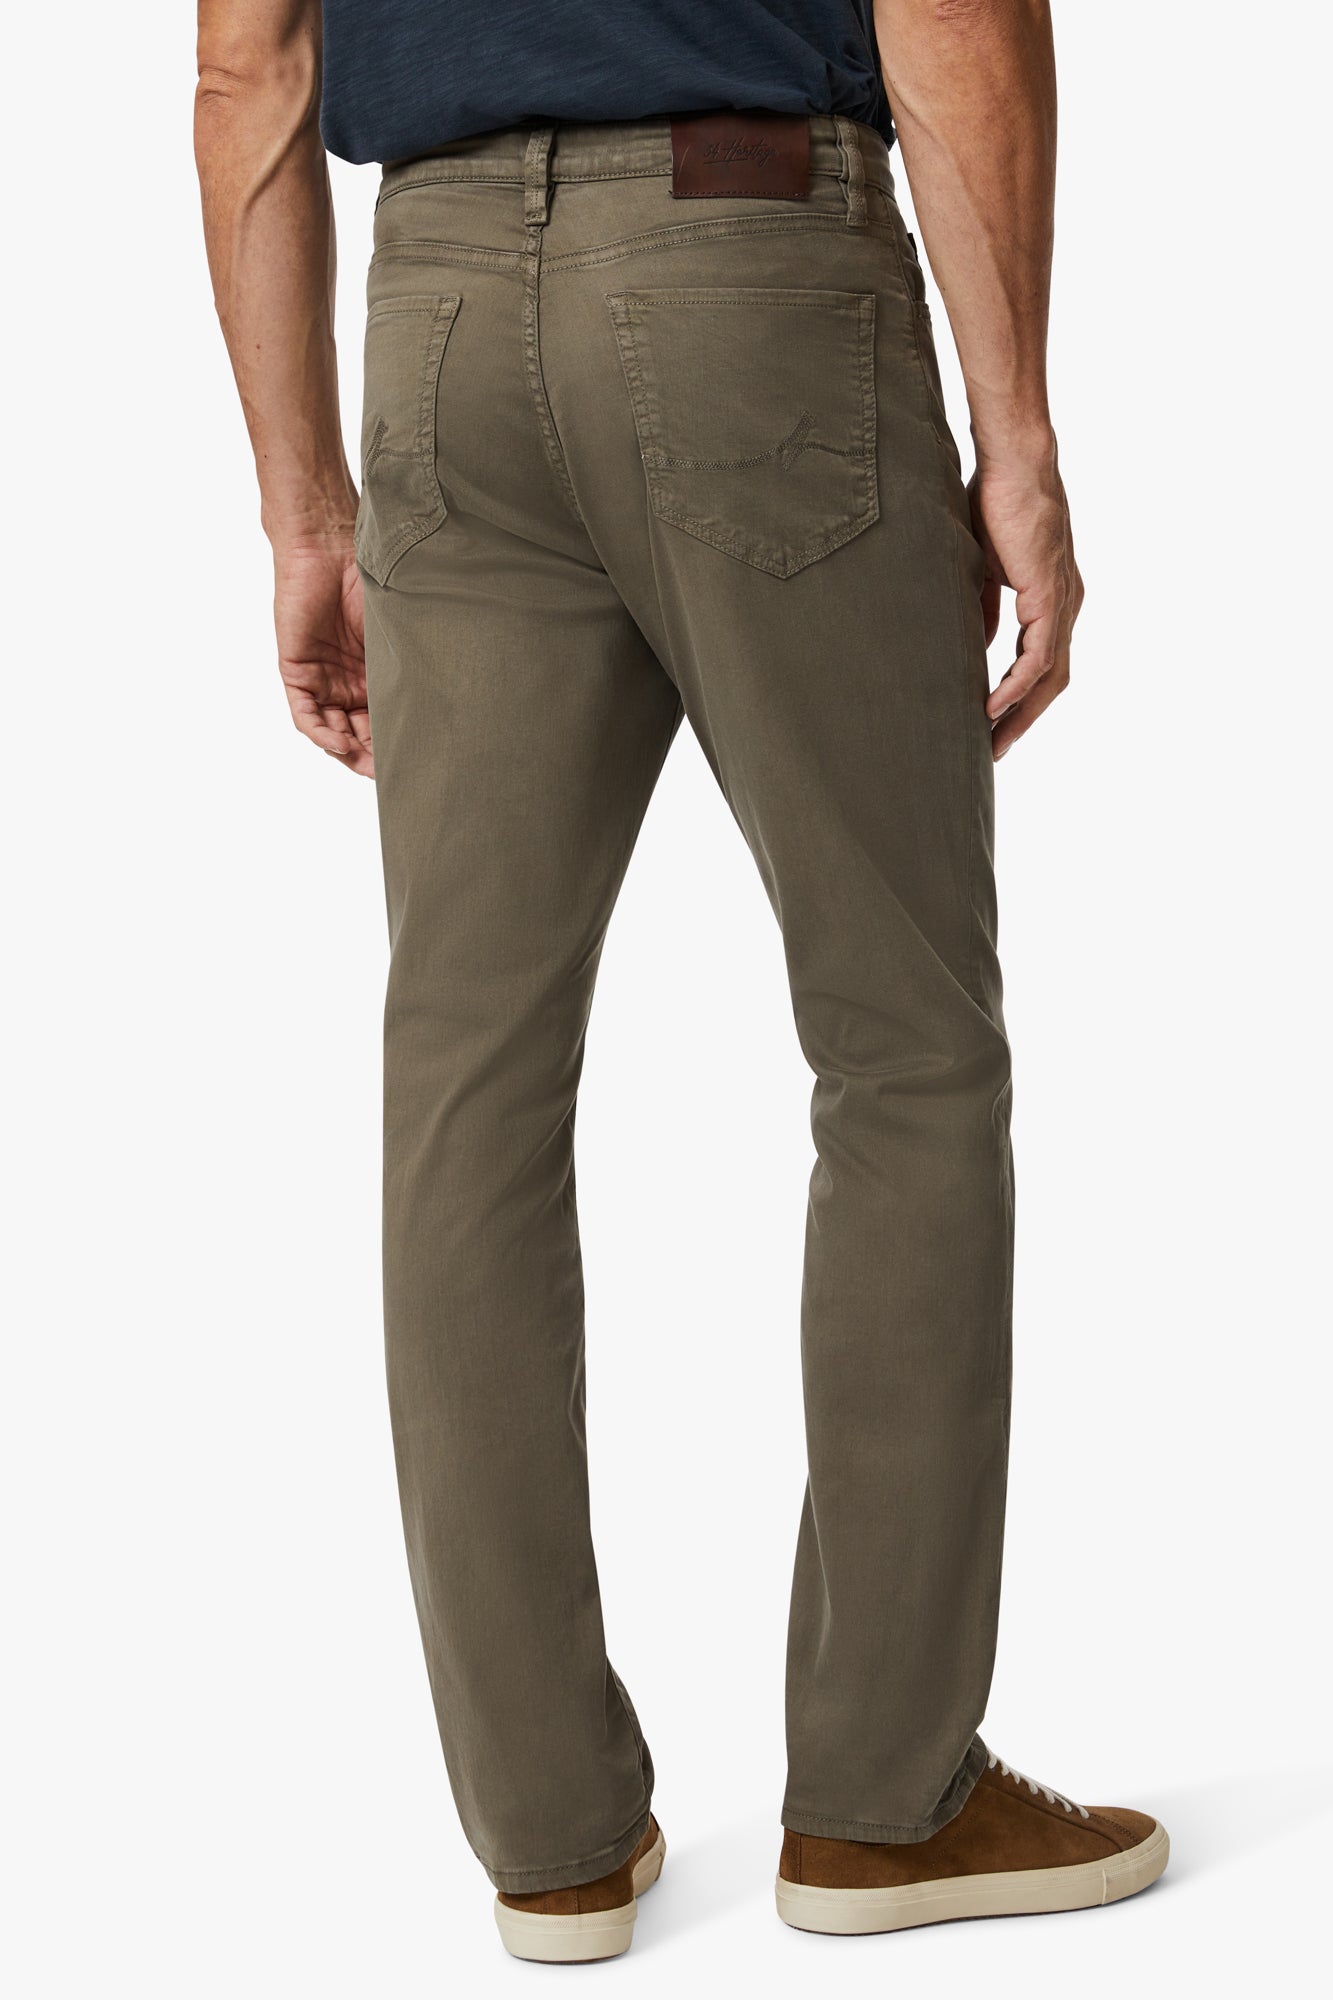 Charisma Relaxed Straight Leg Pants Canteen Twill Image 4